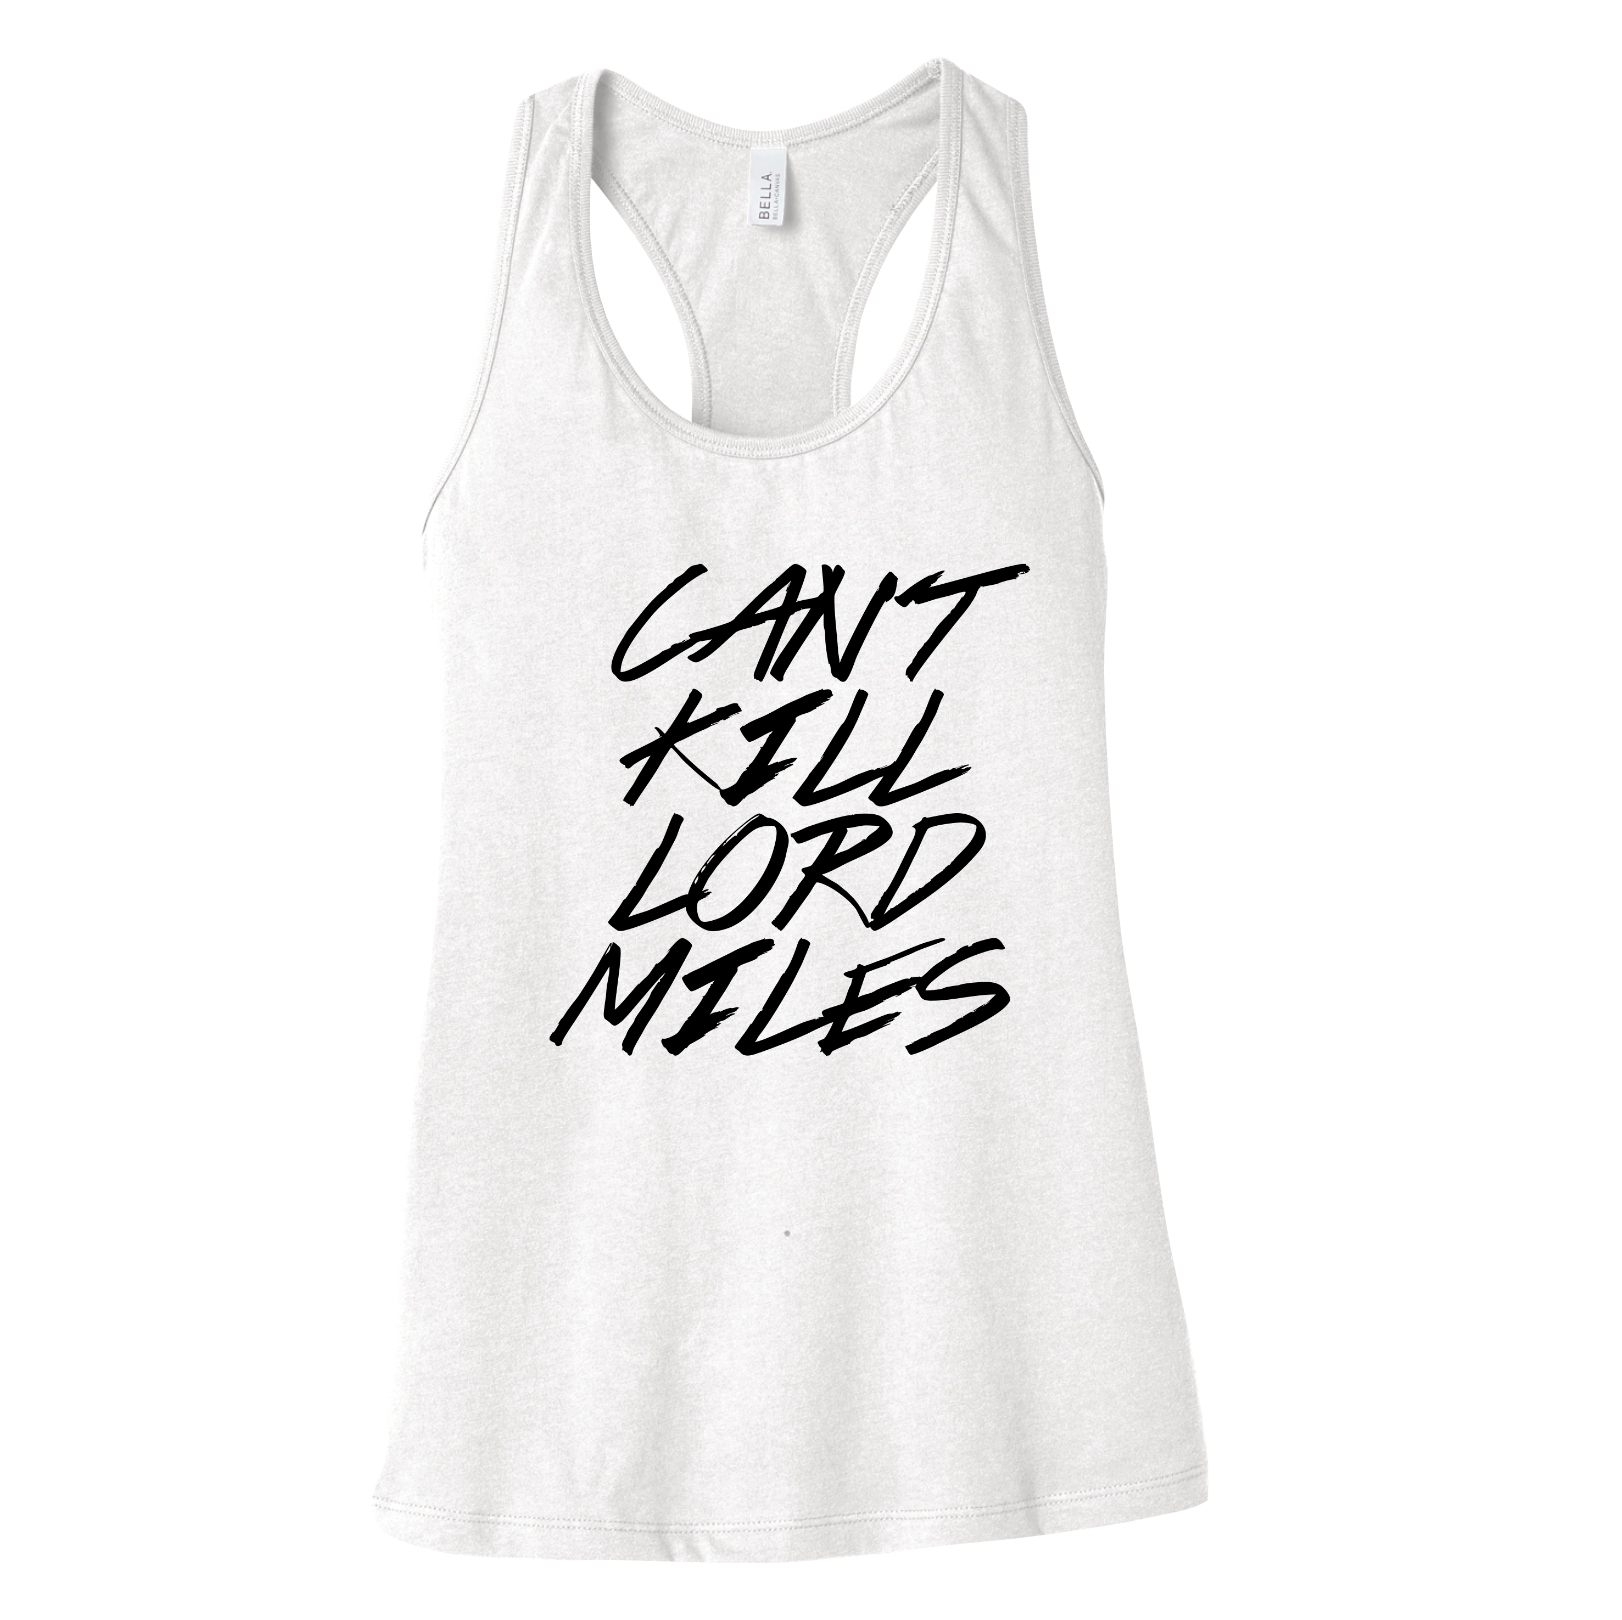 Cant Kill Lord Miles (White) Racerback-1